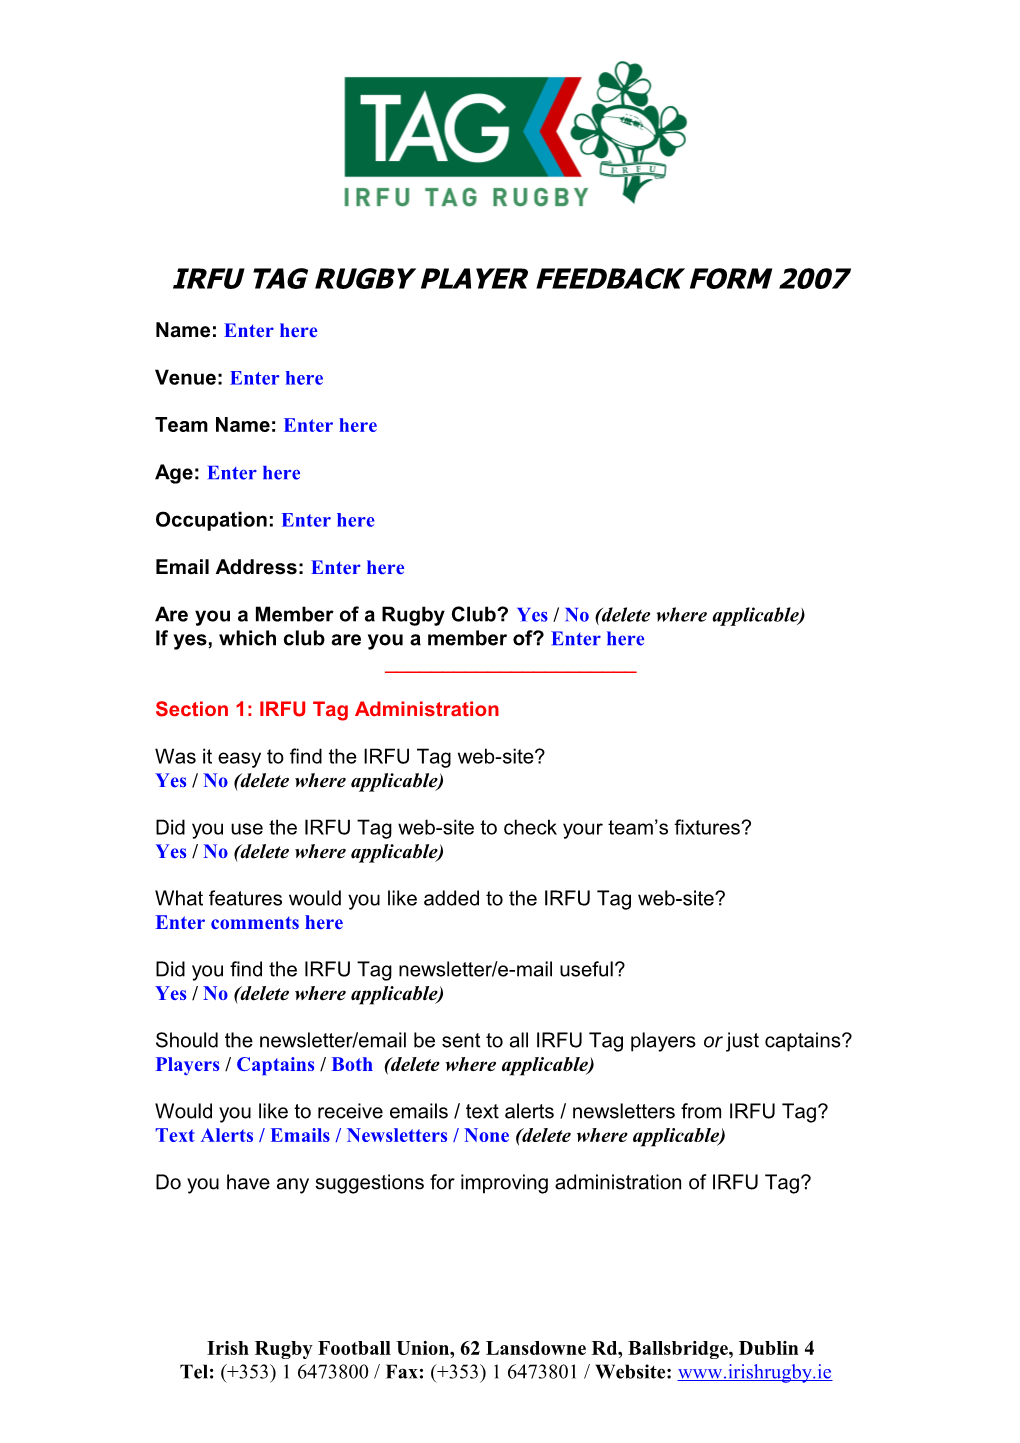 Irfu Tag Rugby Survey August 2007